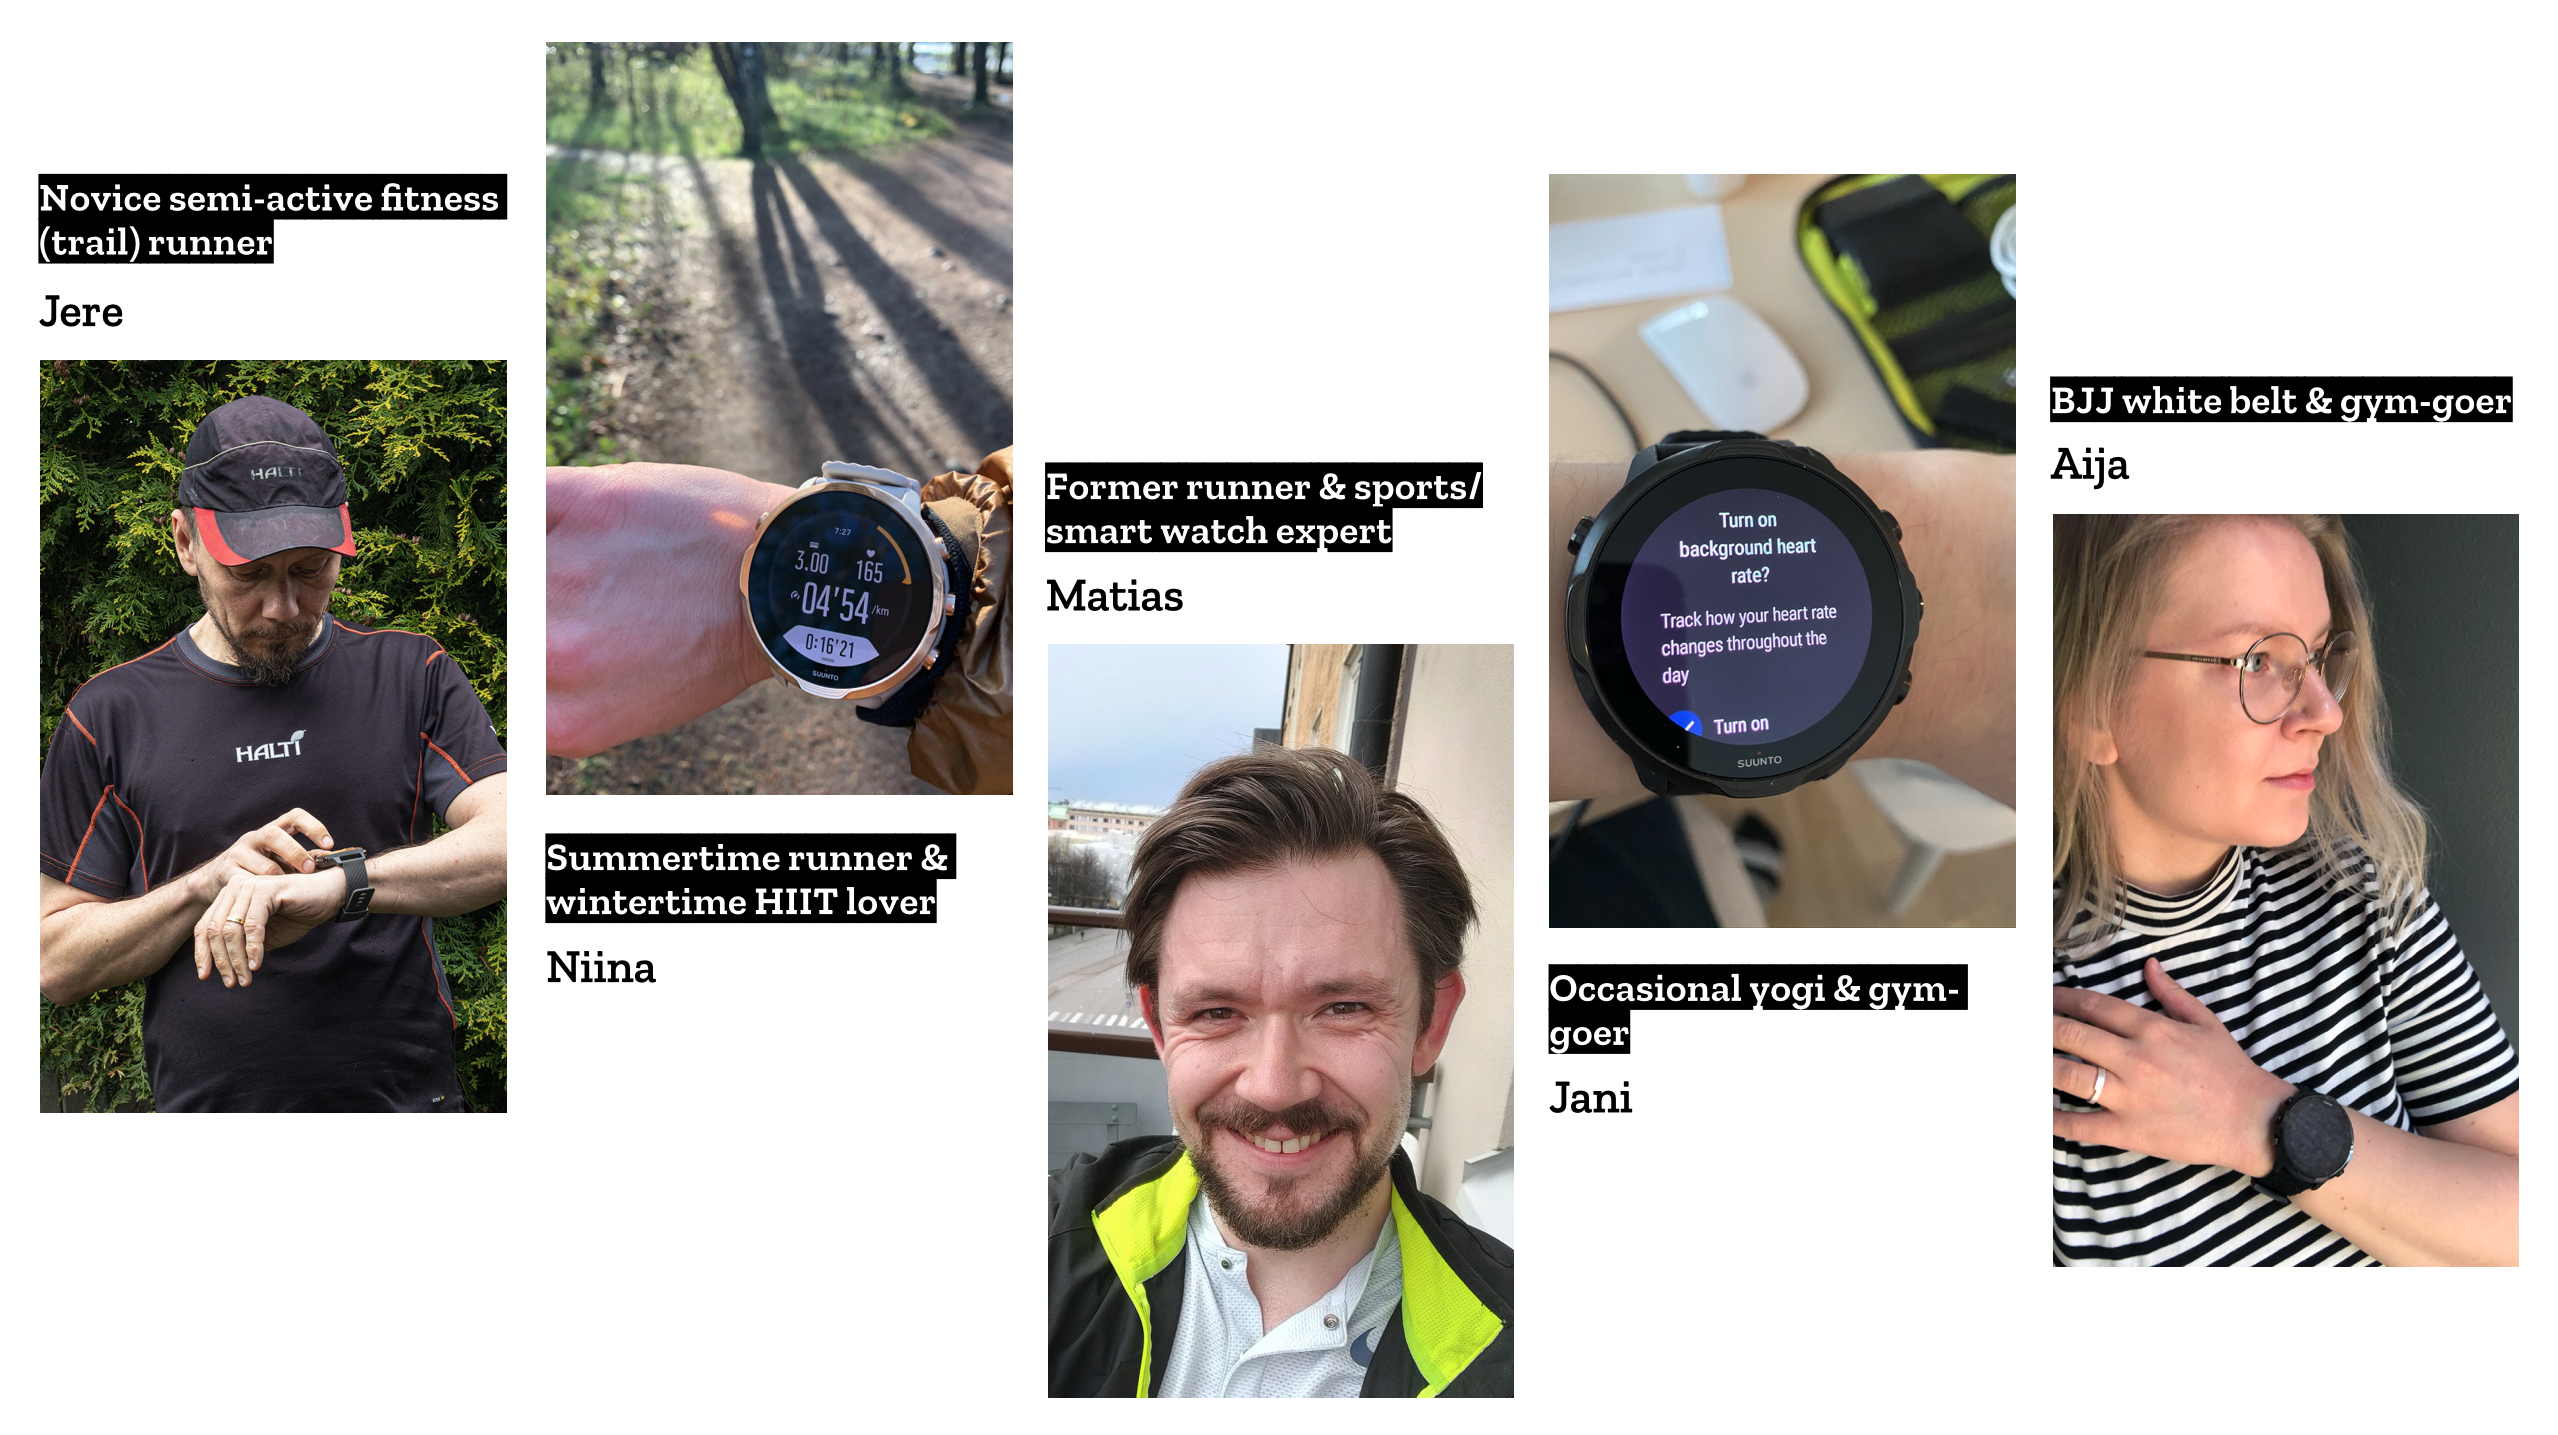 A set of photos that introduce Qvik's experts with short descriptions. The first photo is of Jere, who's a novice semi-active fitness runner. Jere is standing in front of a forest scenery and is looking at a watch on this wrist. The second photo is cropped to show Niina's wrist and the Suunto watch she's wearing. Niina is a summertime runner and wintertime HIIT lover. The third photo is a portrait of a smiling man, Matias, who's a former runner and smart watch expert. The fourth photo shows Jani's wrist with a Suunto watch, on the background you can see a desk. Jani is an occasional yogi and gym-goer. The last photo is of Aija who's looking to the right. Her wrist and the Suunto watch strapped onto it is on display. Aija is a BJJ white belt and gym-goer.